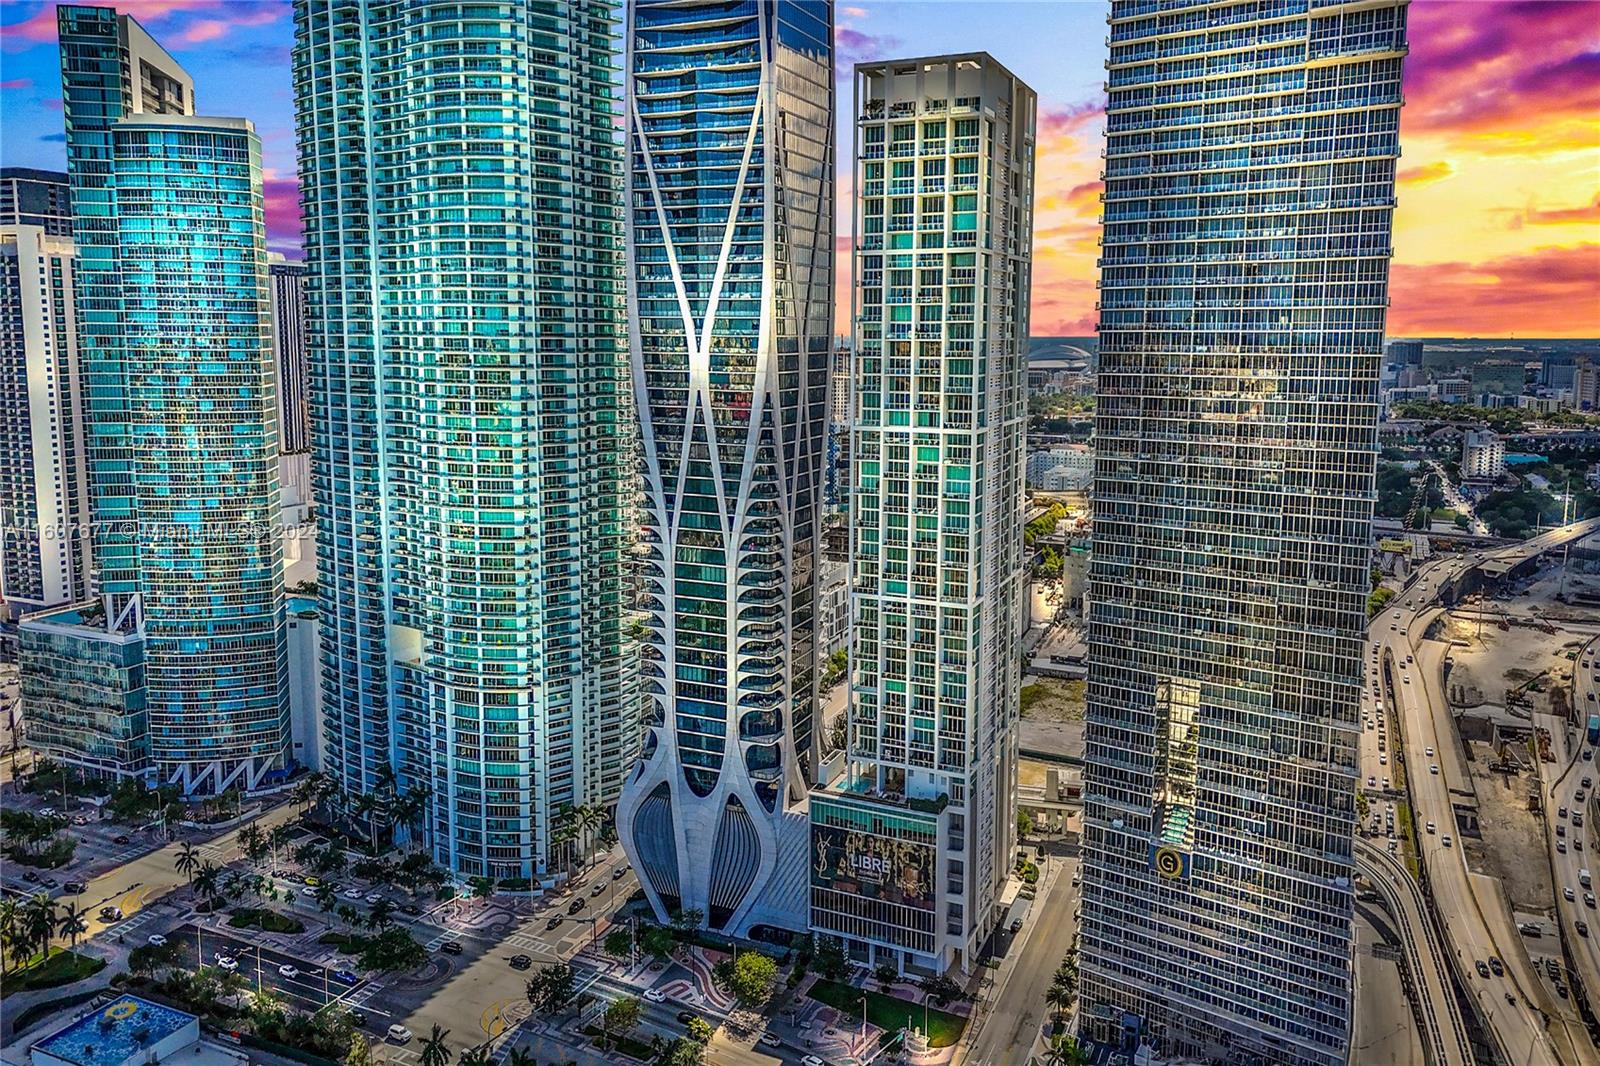 Newly renovated high-floor luxury loft at T. M P. Positioned on the 38th floor, this 2/ 2.5-bath residence spans 1,802 S. F. W/ 20-foot ceilings. Revel in breathtaking panoramic views of the Atlantic Ocean, Biscayne Bay, South Beach, and the vibrant downtown skyline—all from the comfort of your own home.
Newly renovated, this unit features porcelain flooring throughout, new kitchen island, pantry, and den. The master suite is enclosed with floor-to-ceiling glass, brand-new spa like shower, and complemented by a spacious walk-in closet.
Ten Museum Park epitomizes full-service luxury living. Residents enjoy access to five swimming pools, a state-of-the-art gym, the renowned Clinique La Prairie Spa, and exclusive membership to a private south of fifth beach club.